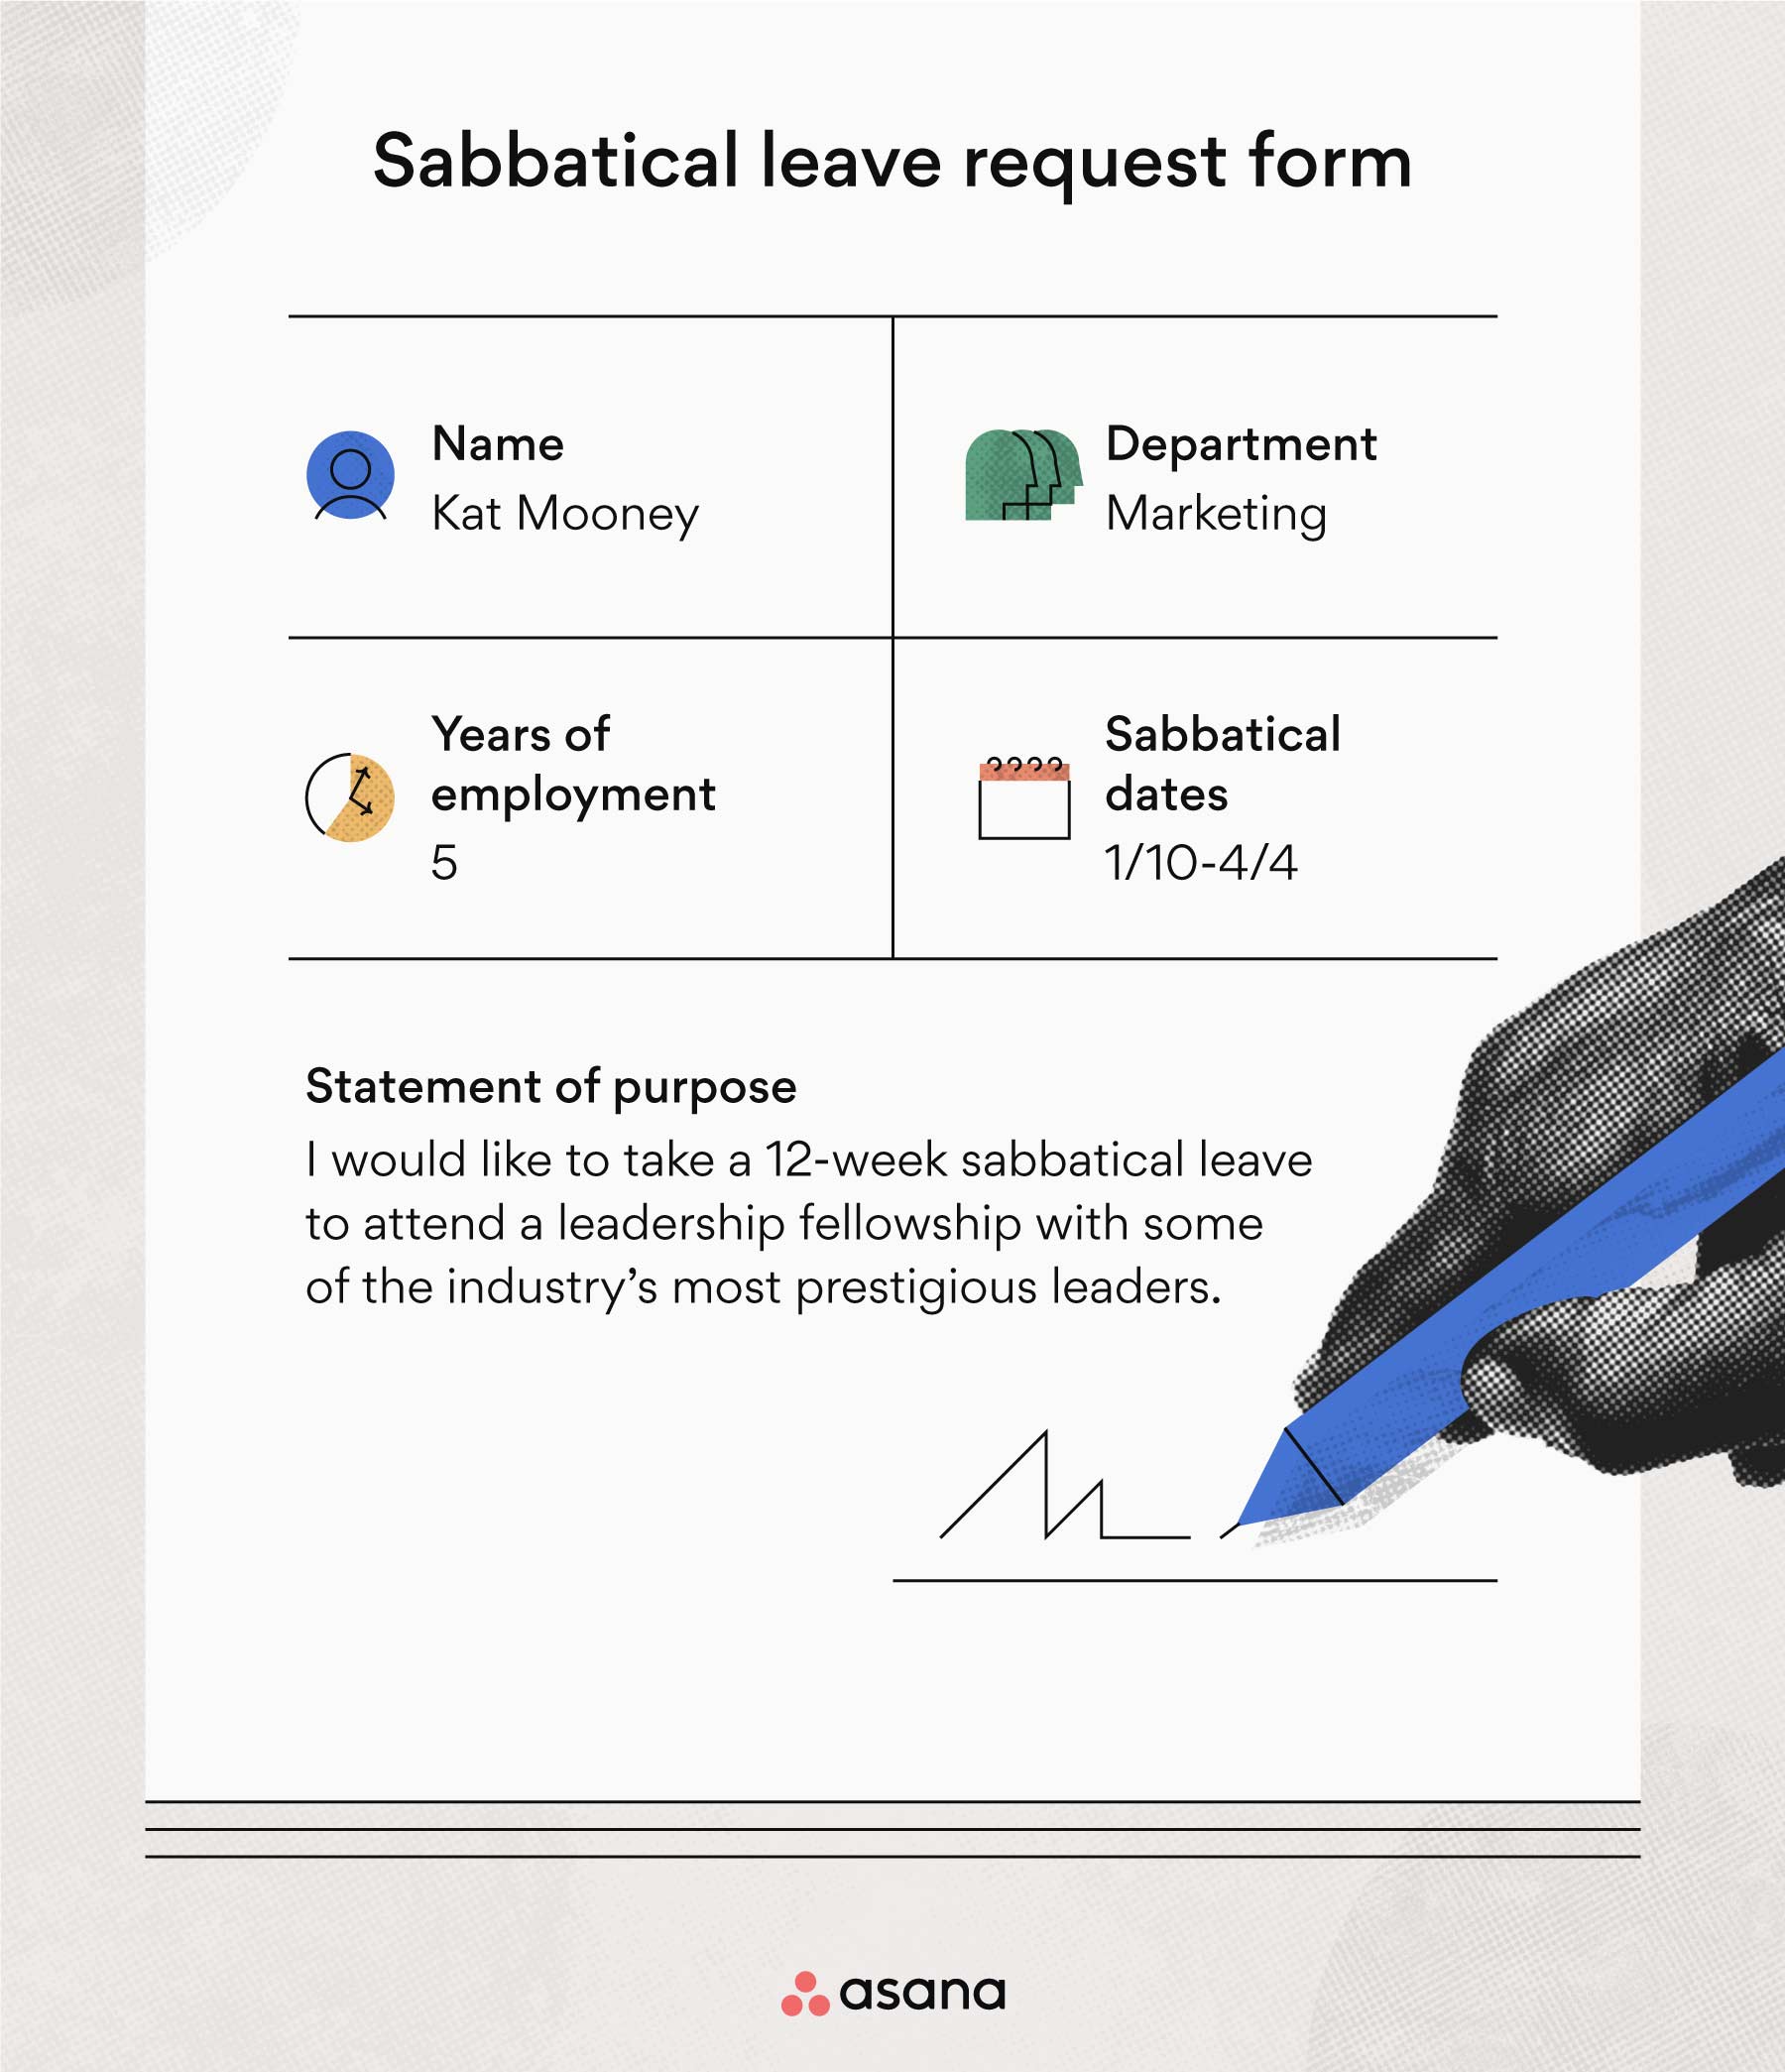 How to submit a sabbatical request